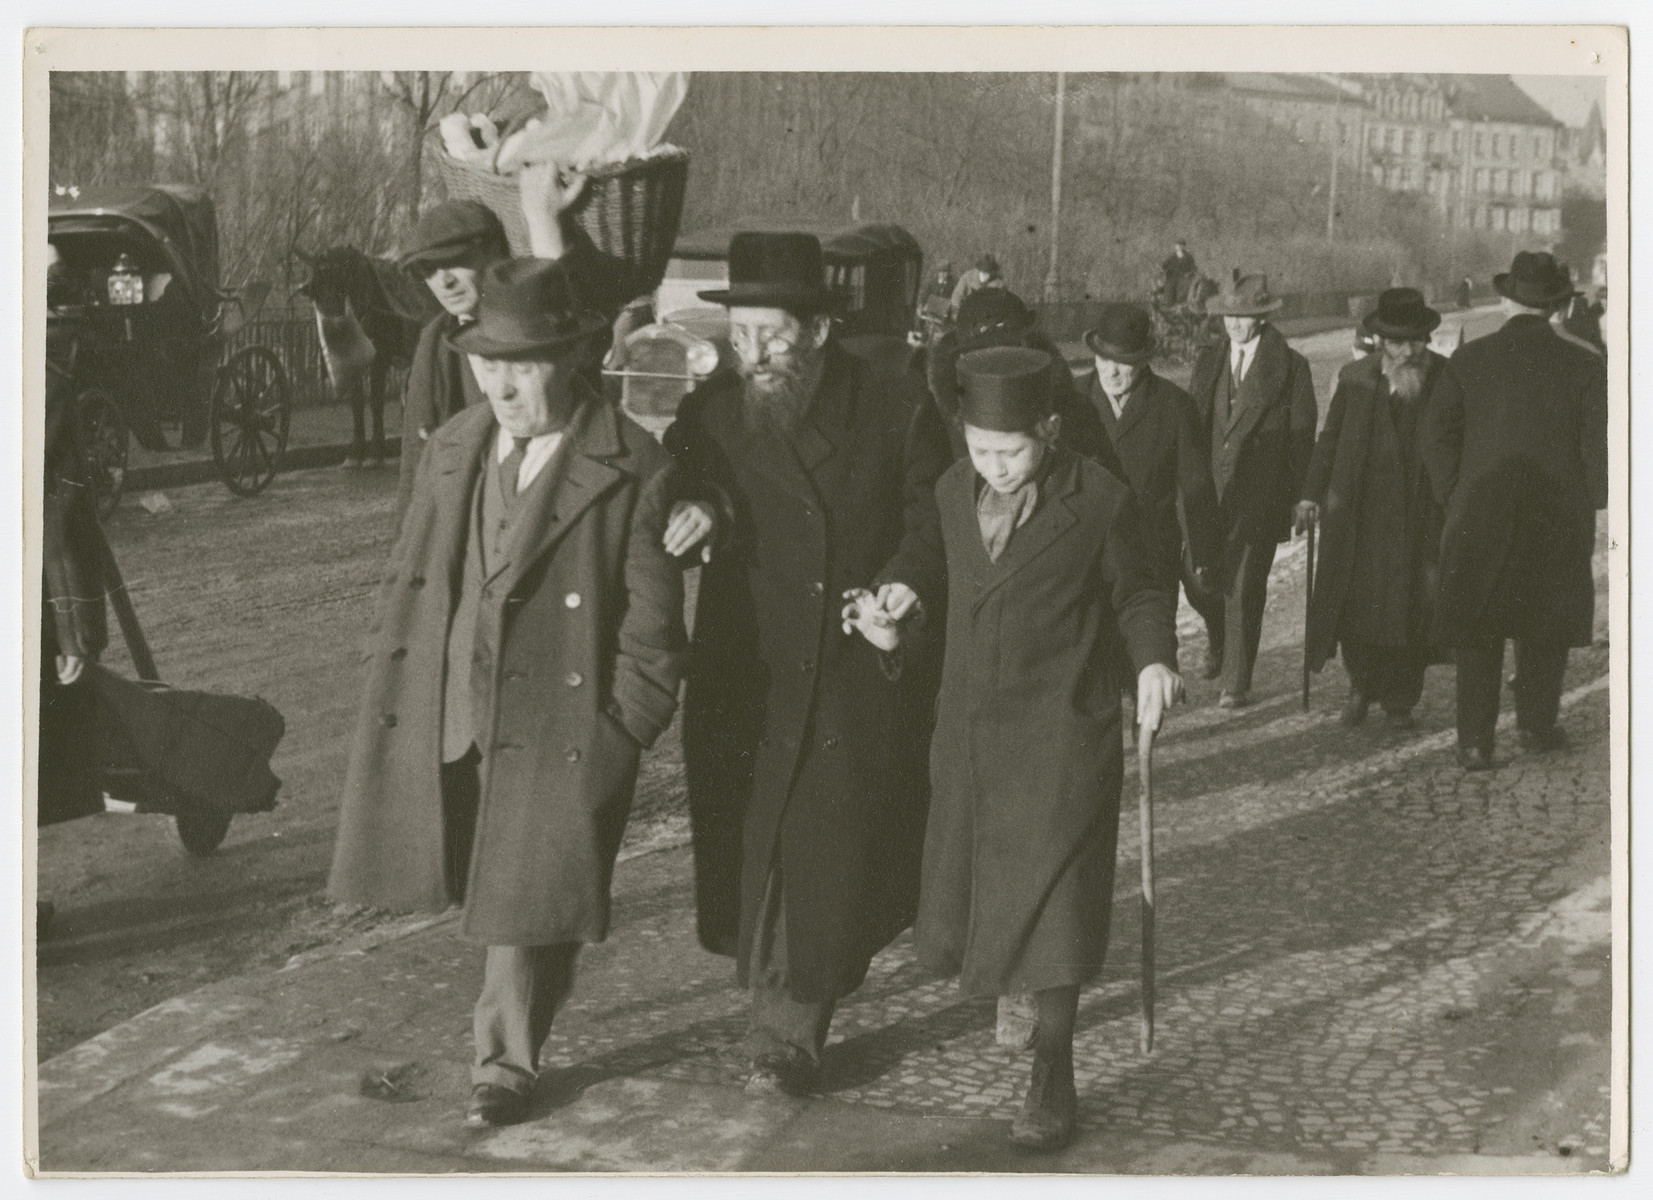 A group of religious Jews walk down a street in Karkow.

Photograph is used on page 139 of Robert Gessner's "Some of My Best Friends are Jews."